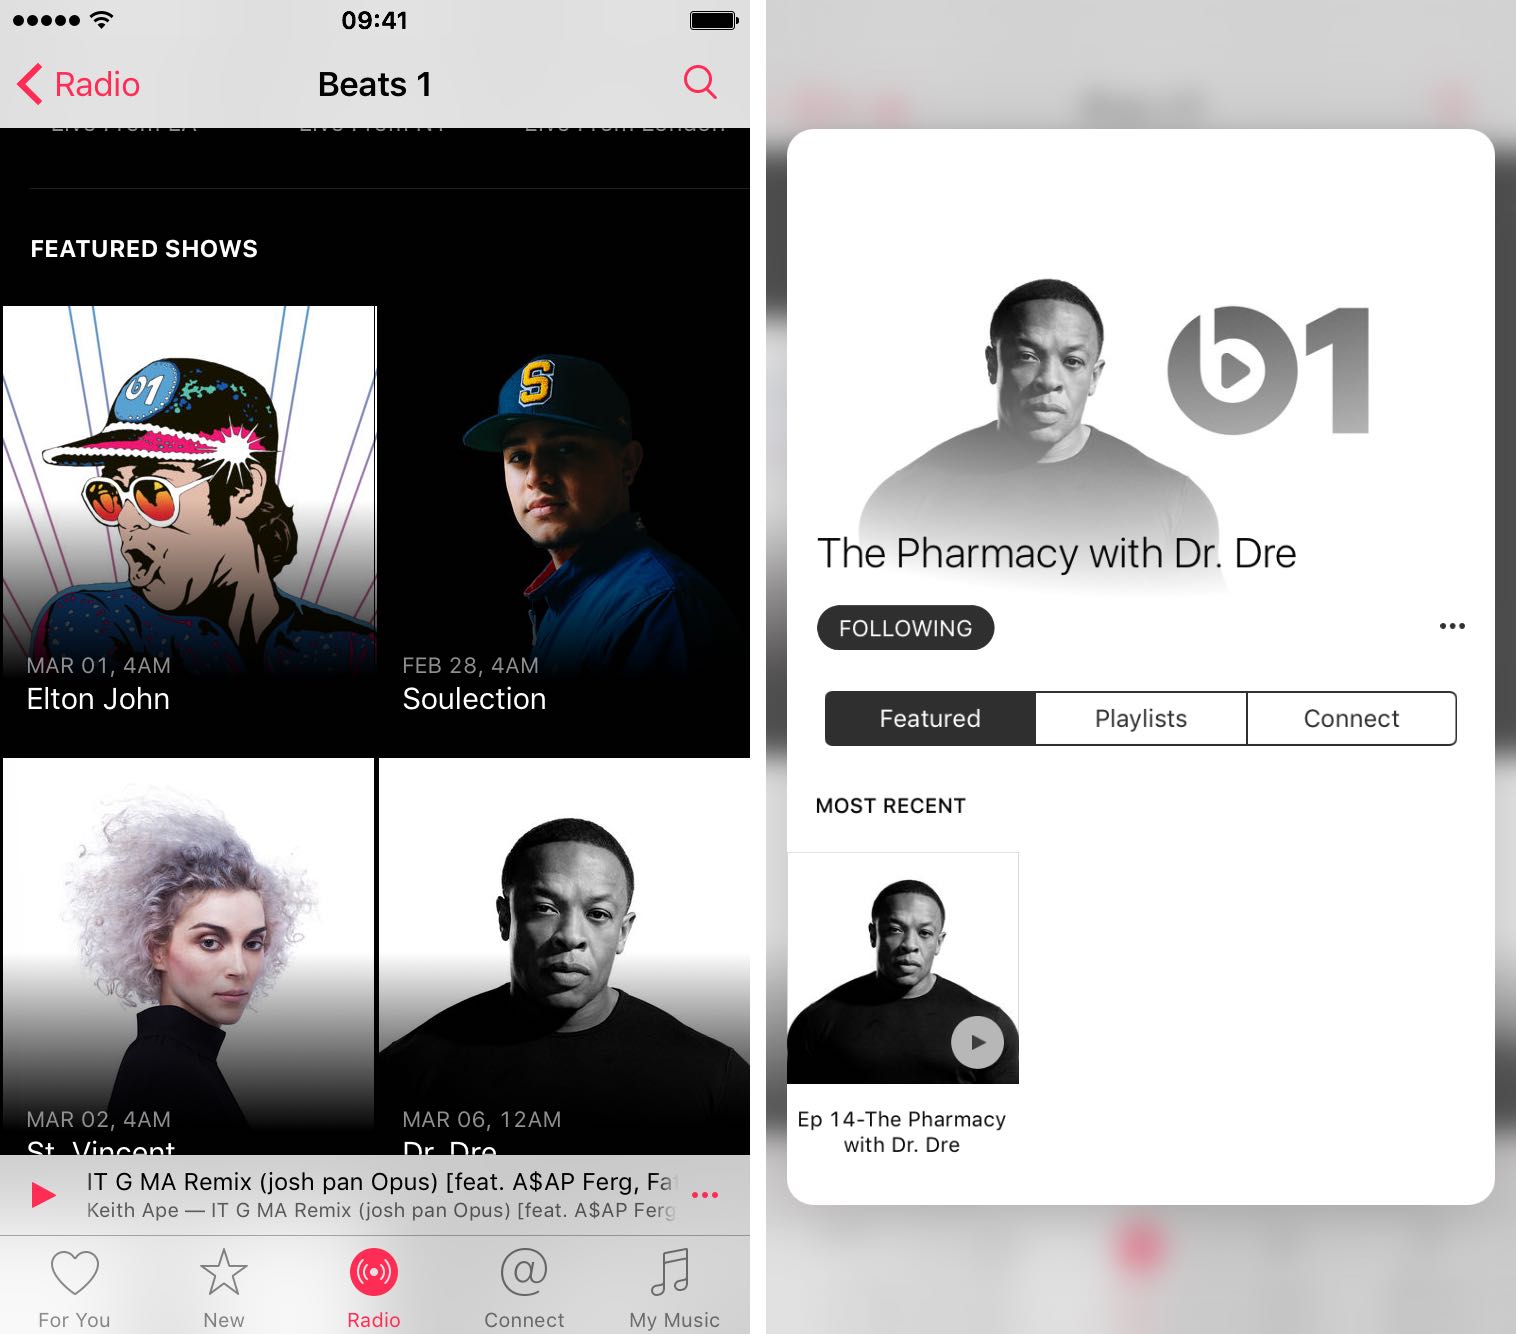 iOS 9 Music 3D Touch gestures iPhone 6s screenshot 005